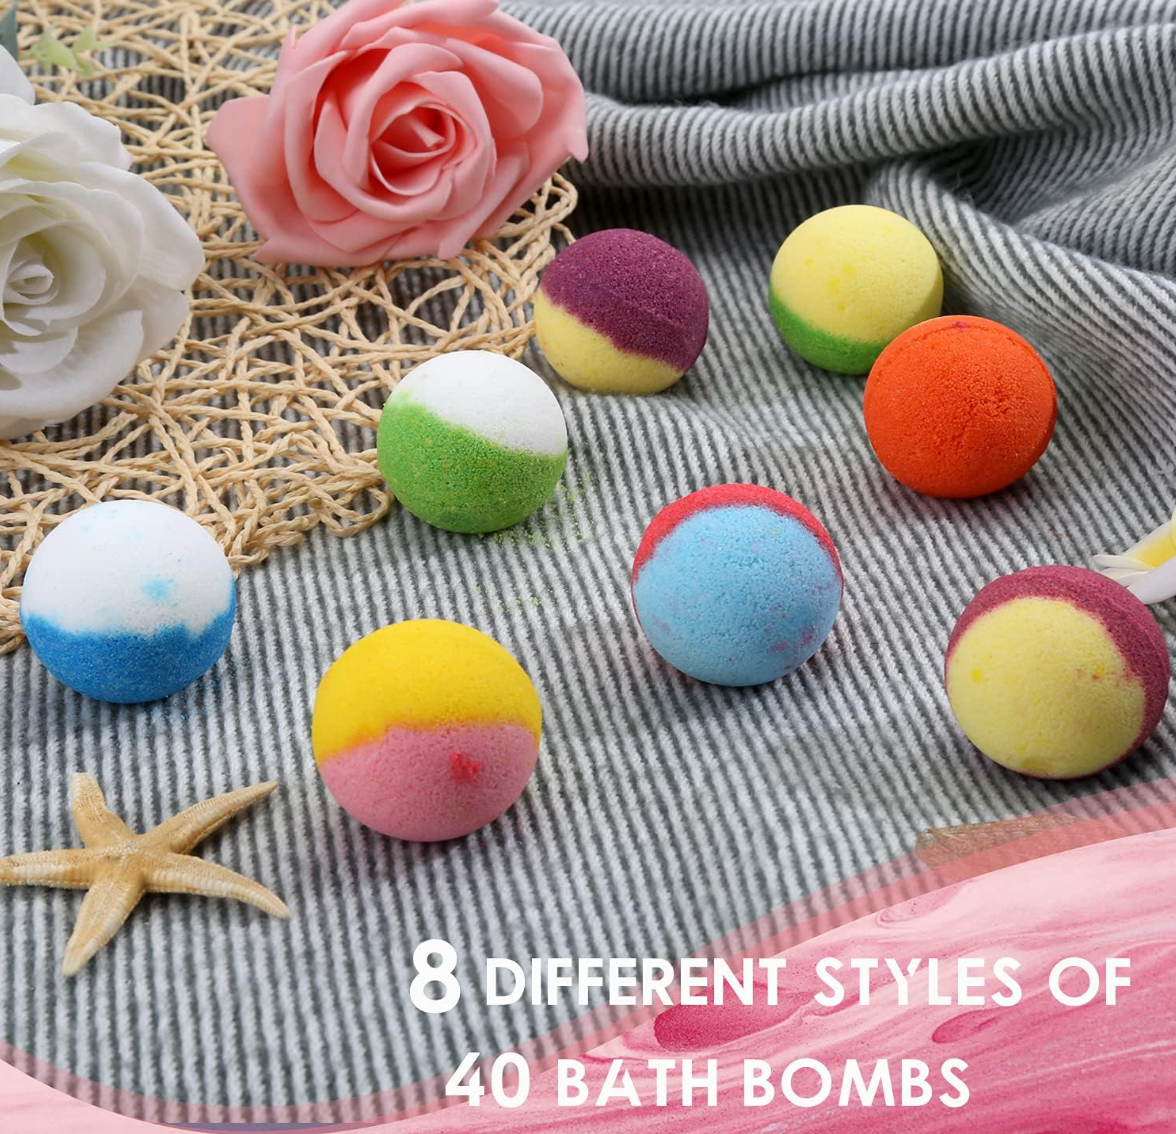 Bath Bomb Gift Set, Family Pack Mini Bath Bombs with Reusable Bowknot, 40 Pcs Organic Bath Bombs, Natural Bath Bombs for Kids, Women & Men, Best Gift for Any Anniversaries